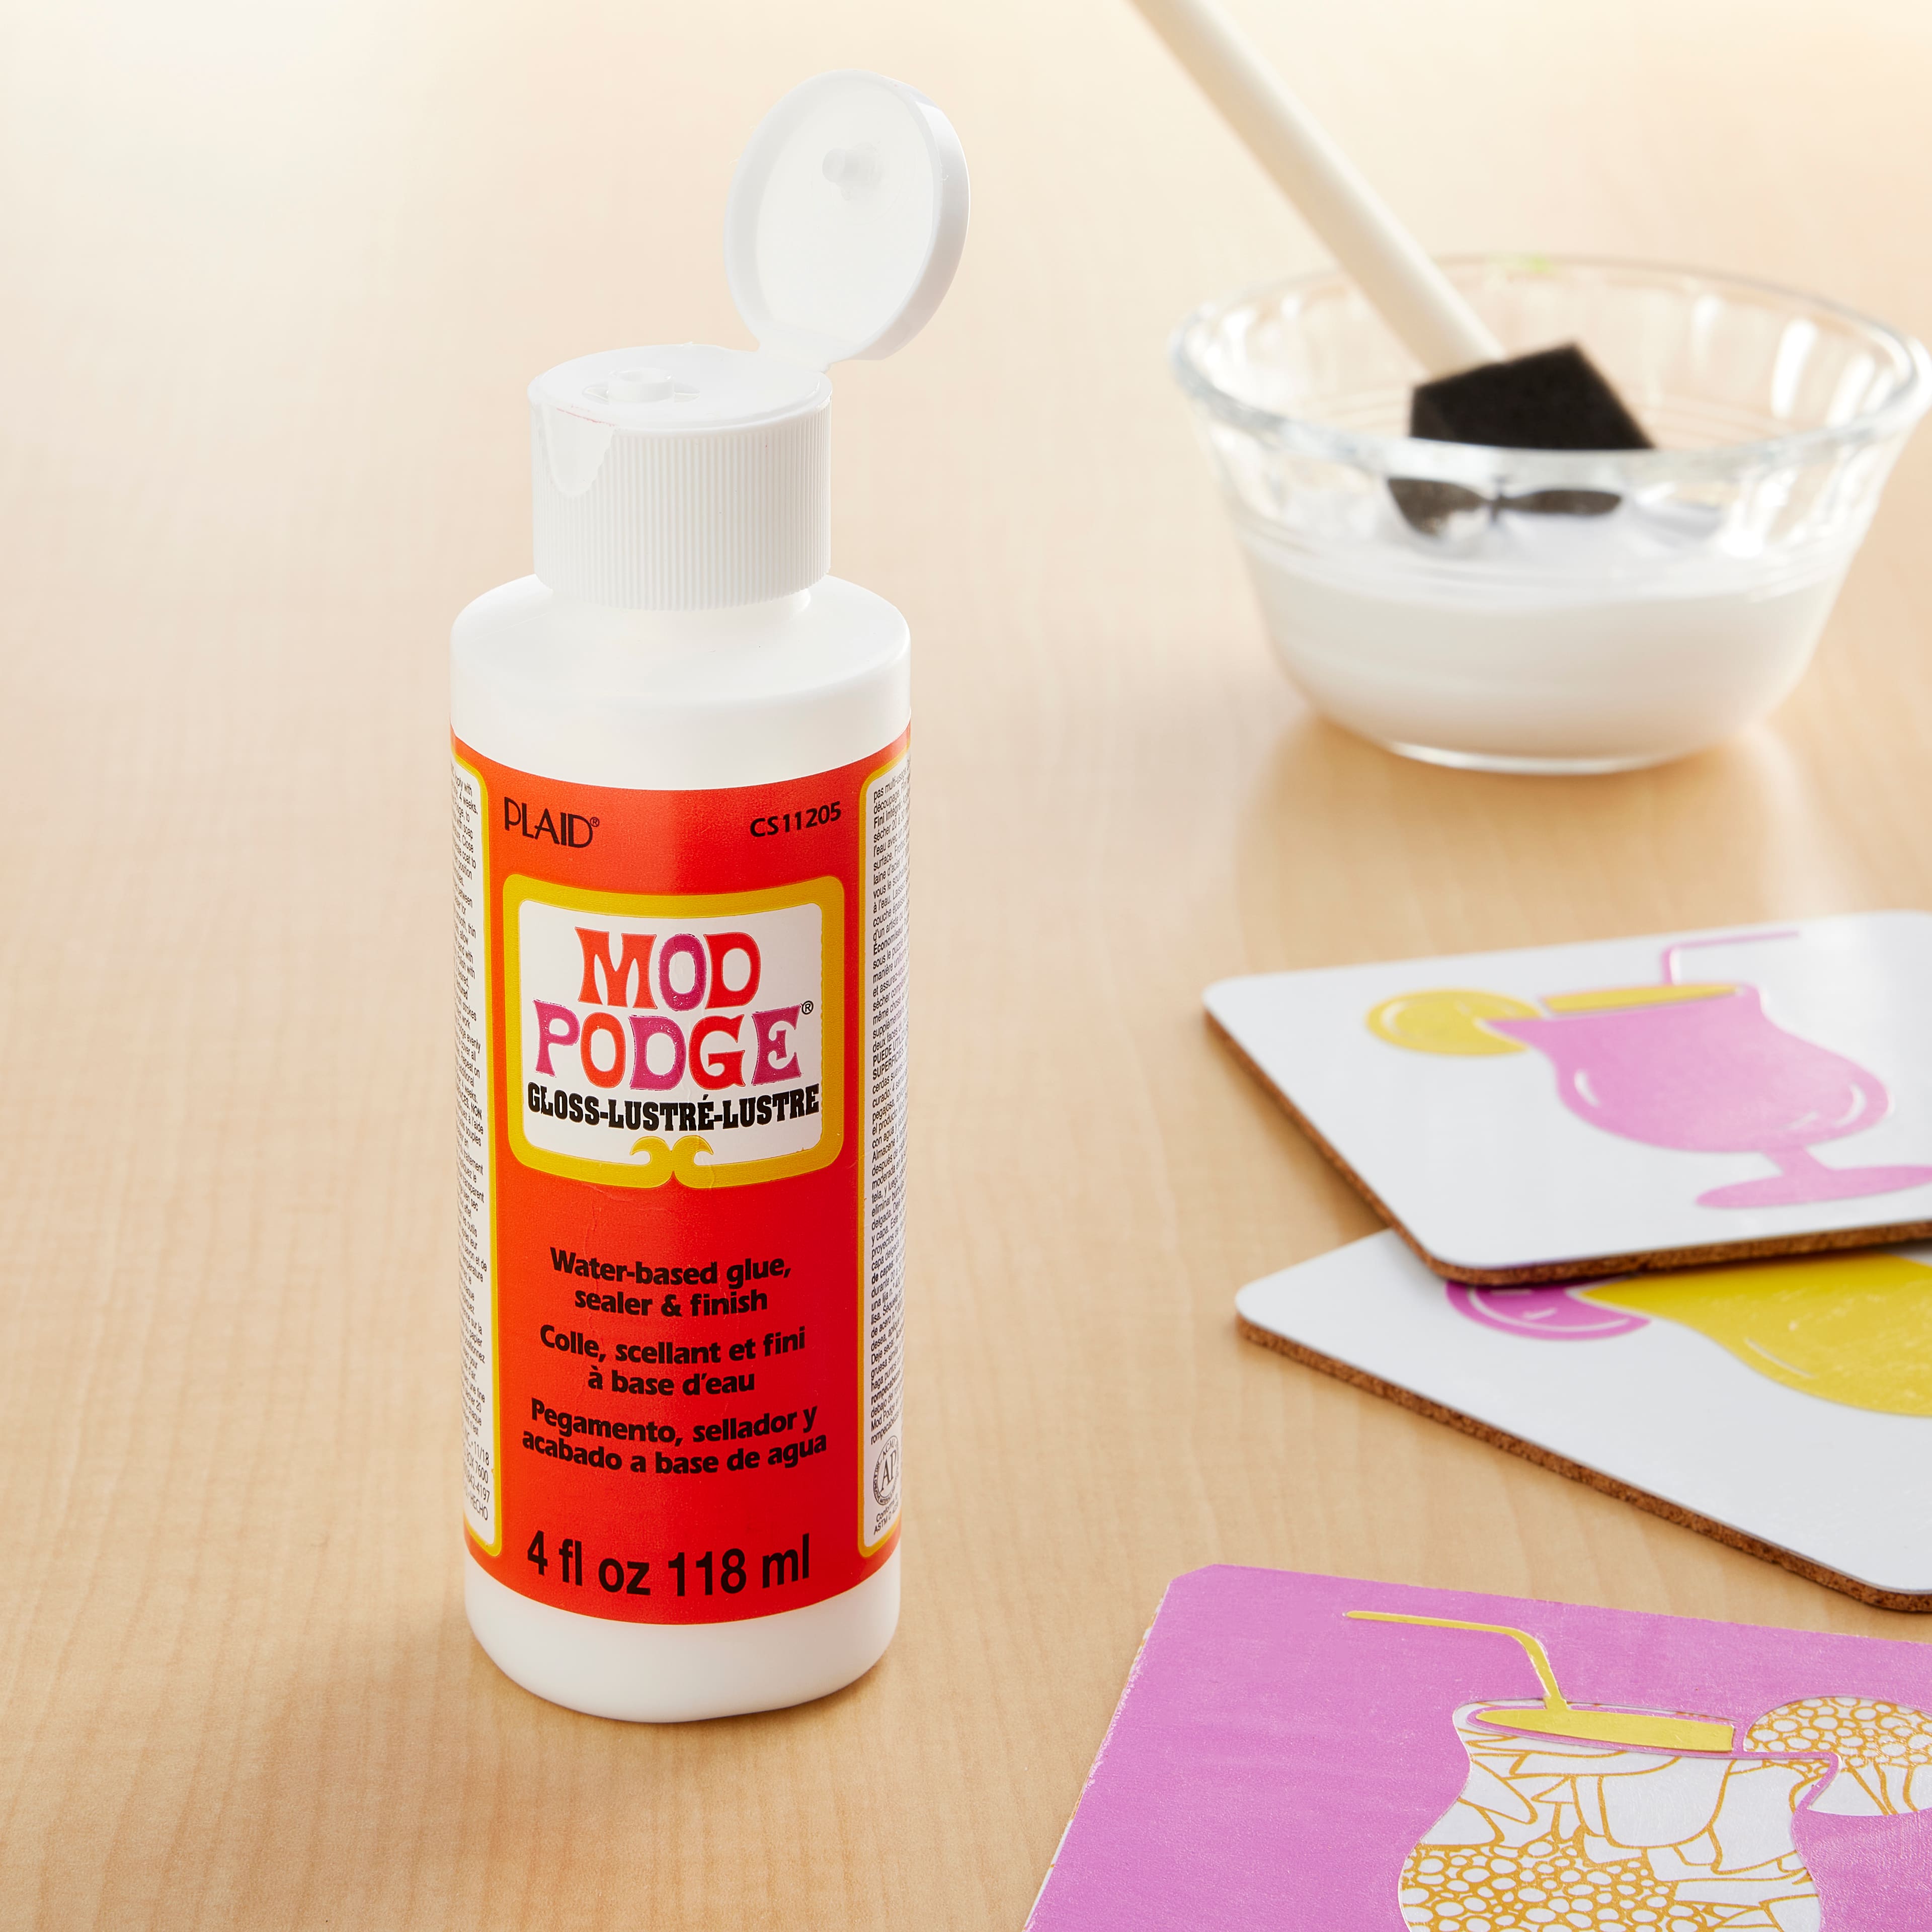 Mod Podge Fast Dry Non-Flammable Tissue Glue and Glaze, 1 gal Jar, Gloss